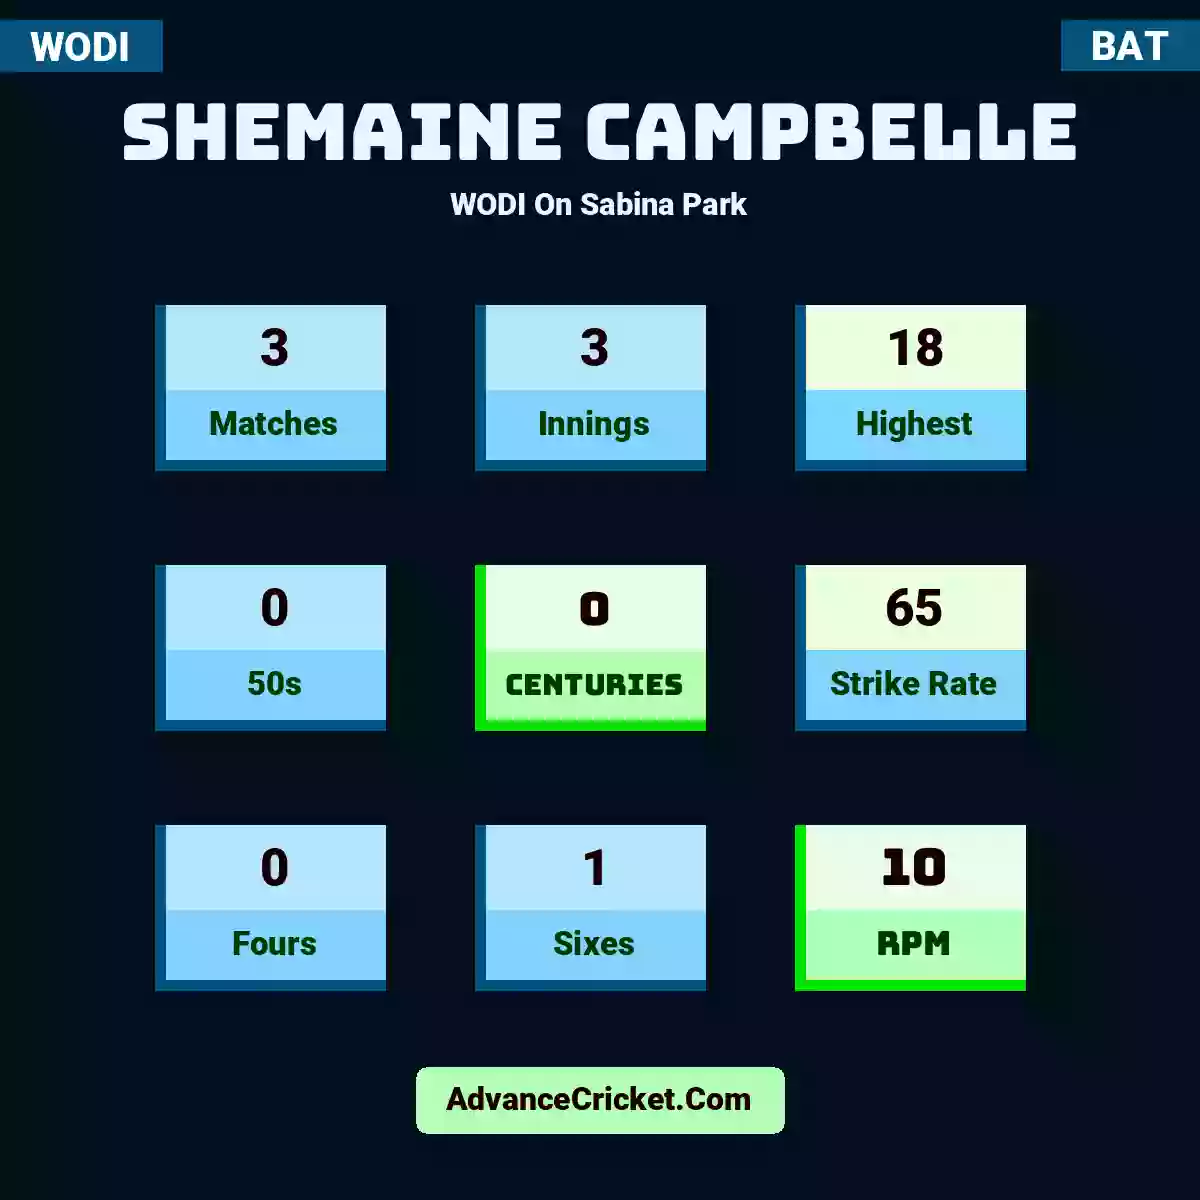 Shemaine Campbelle WODI  On Sabina Park, Shemaine Campbelle played 3 matches, scored 18 runs as highest, 0 half-centuries, and 0 centuries, with a strike rate of 65. S.Campbelle hit 0 fours and 1 sixes, with an RPM of 10.